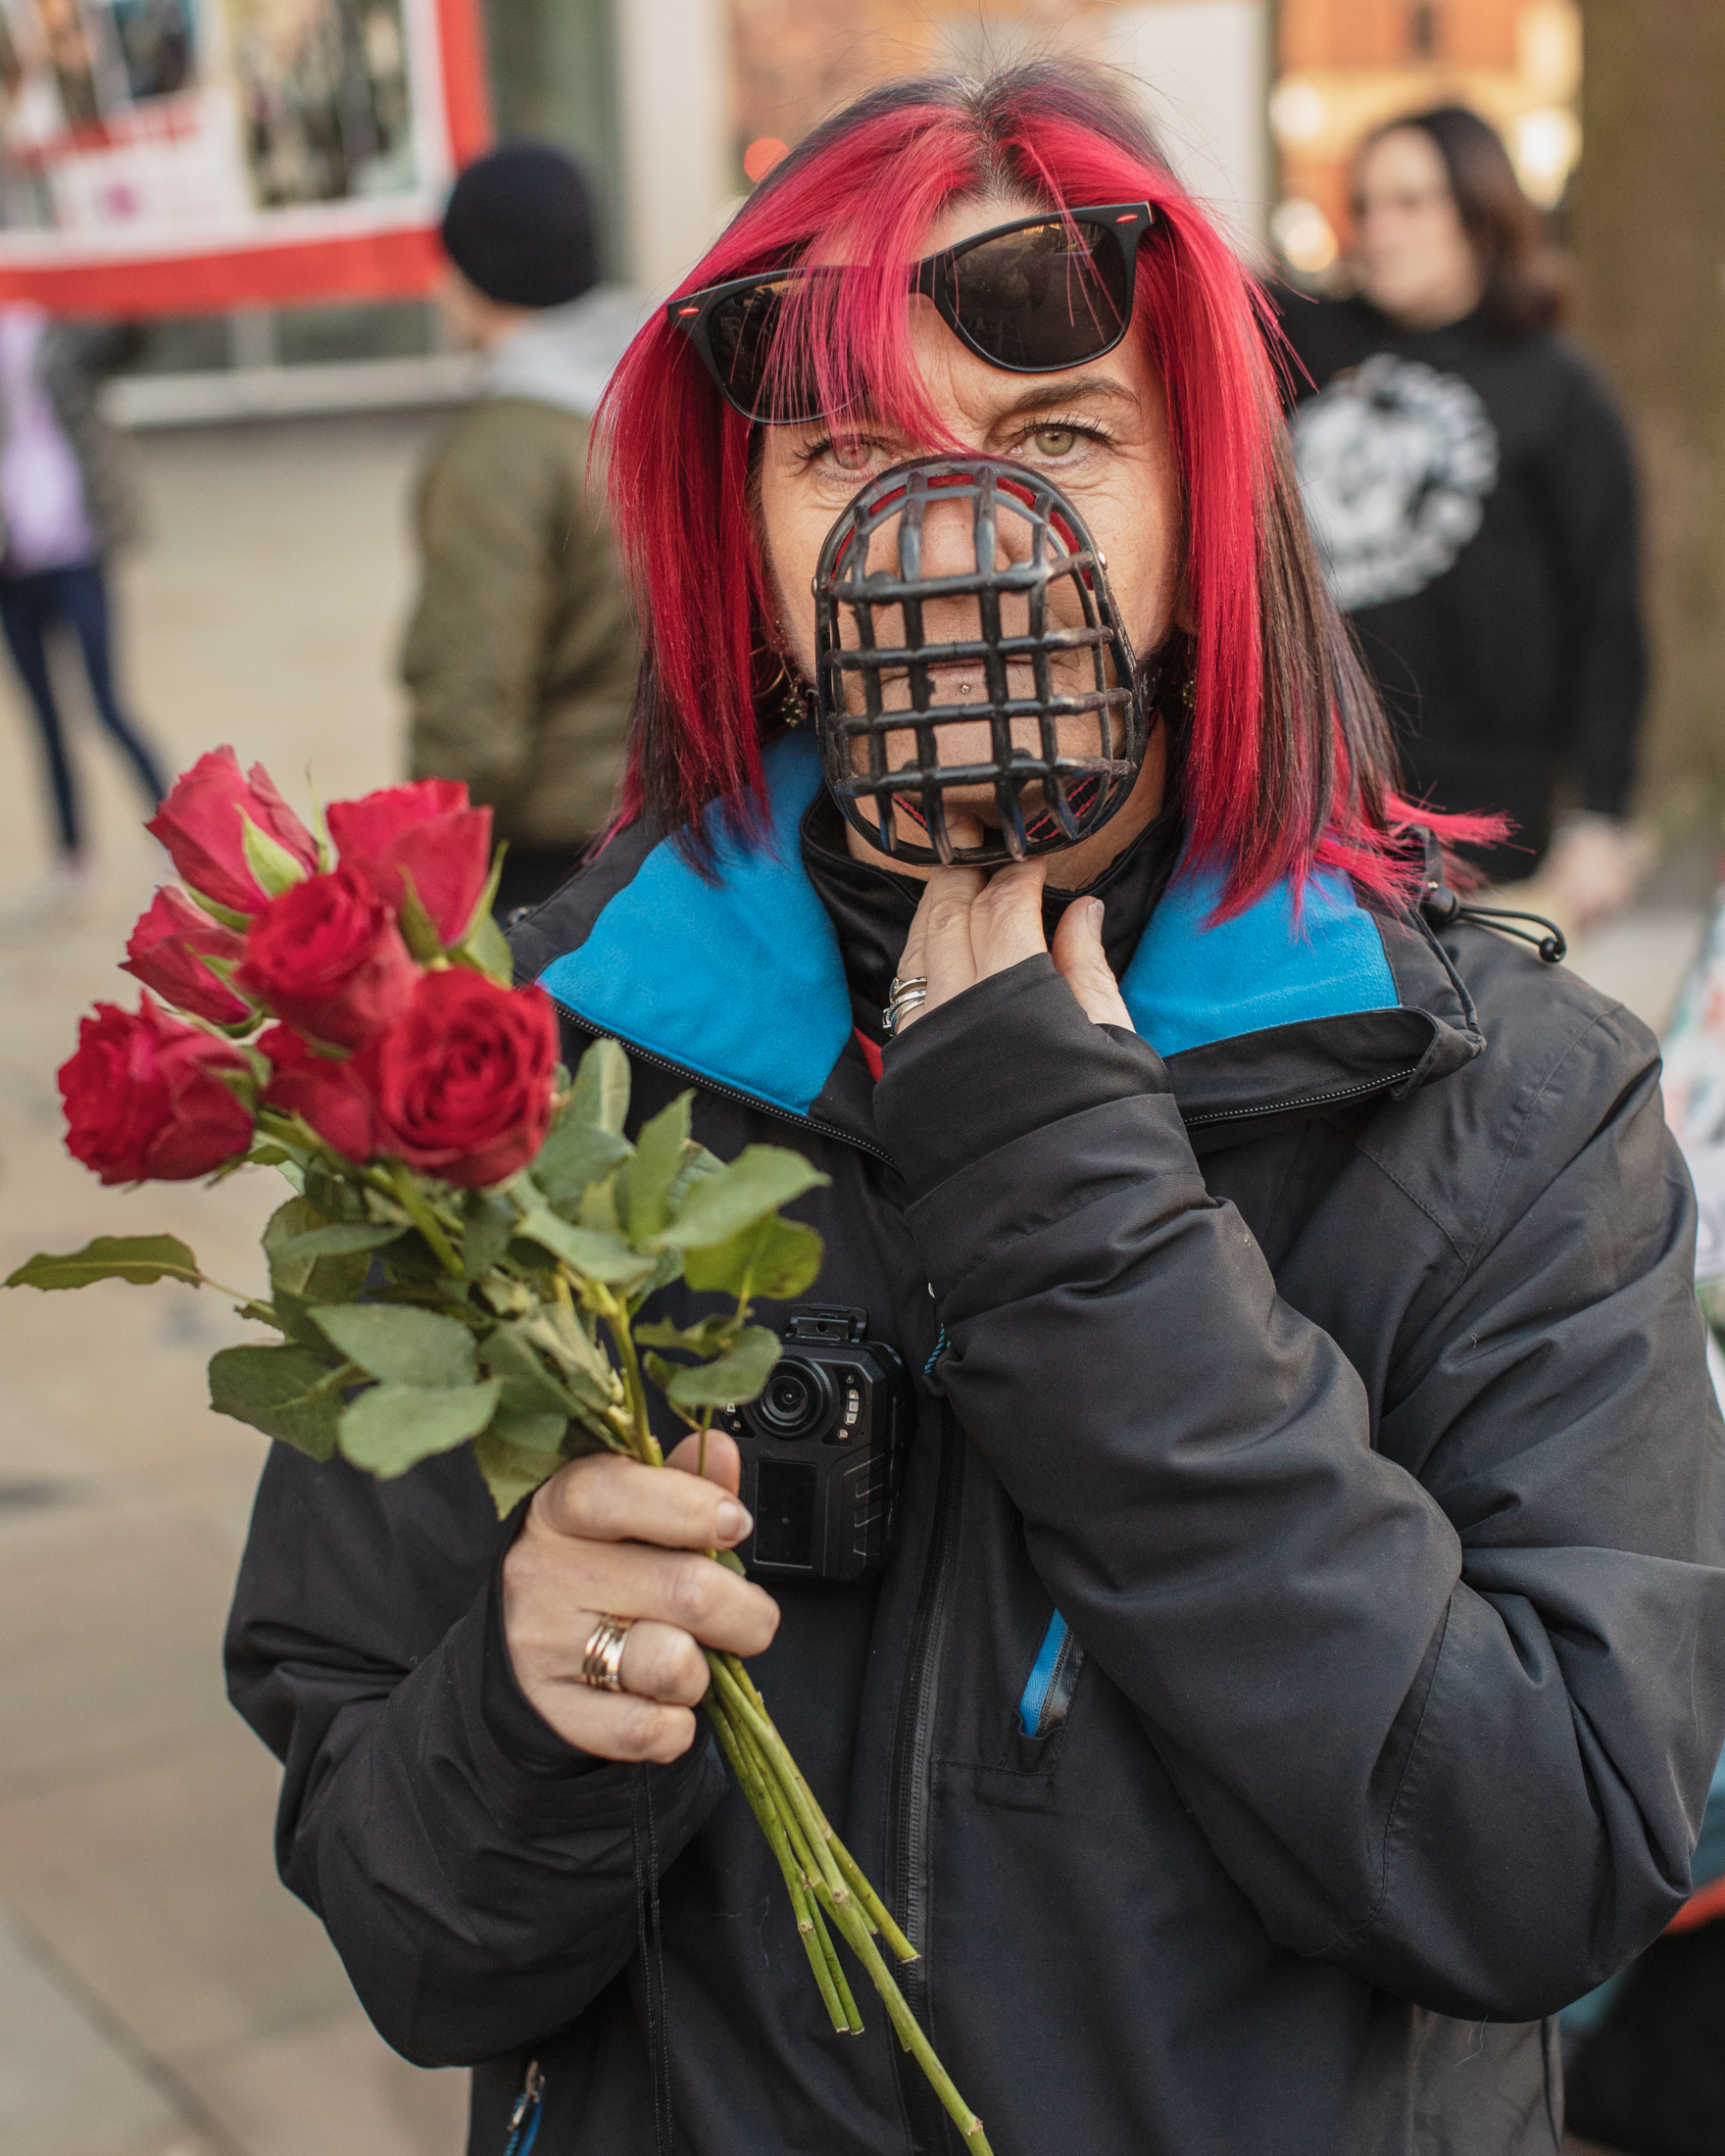 Manchester, UK: Woman at an XL Bully protest wears a muzzle